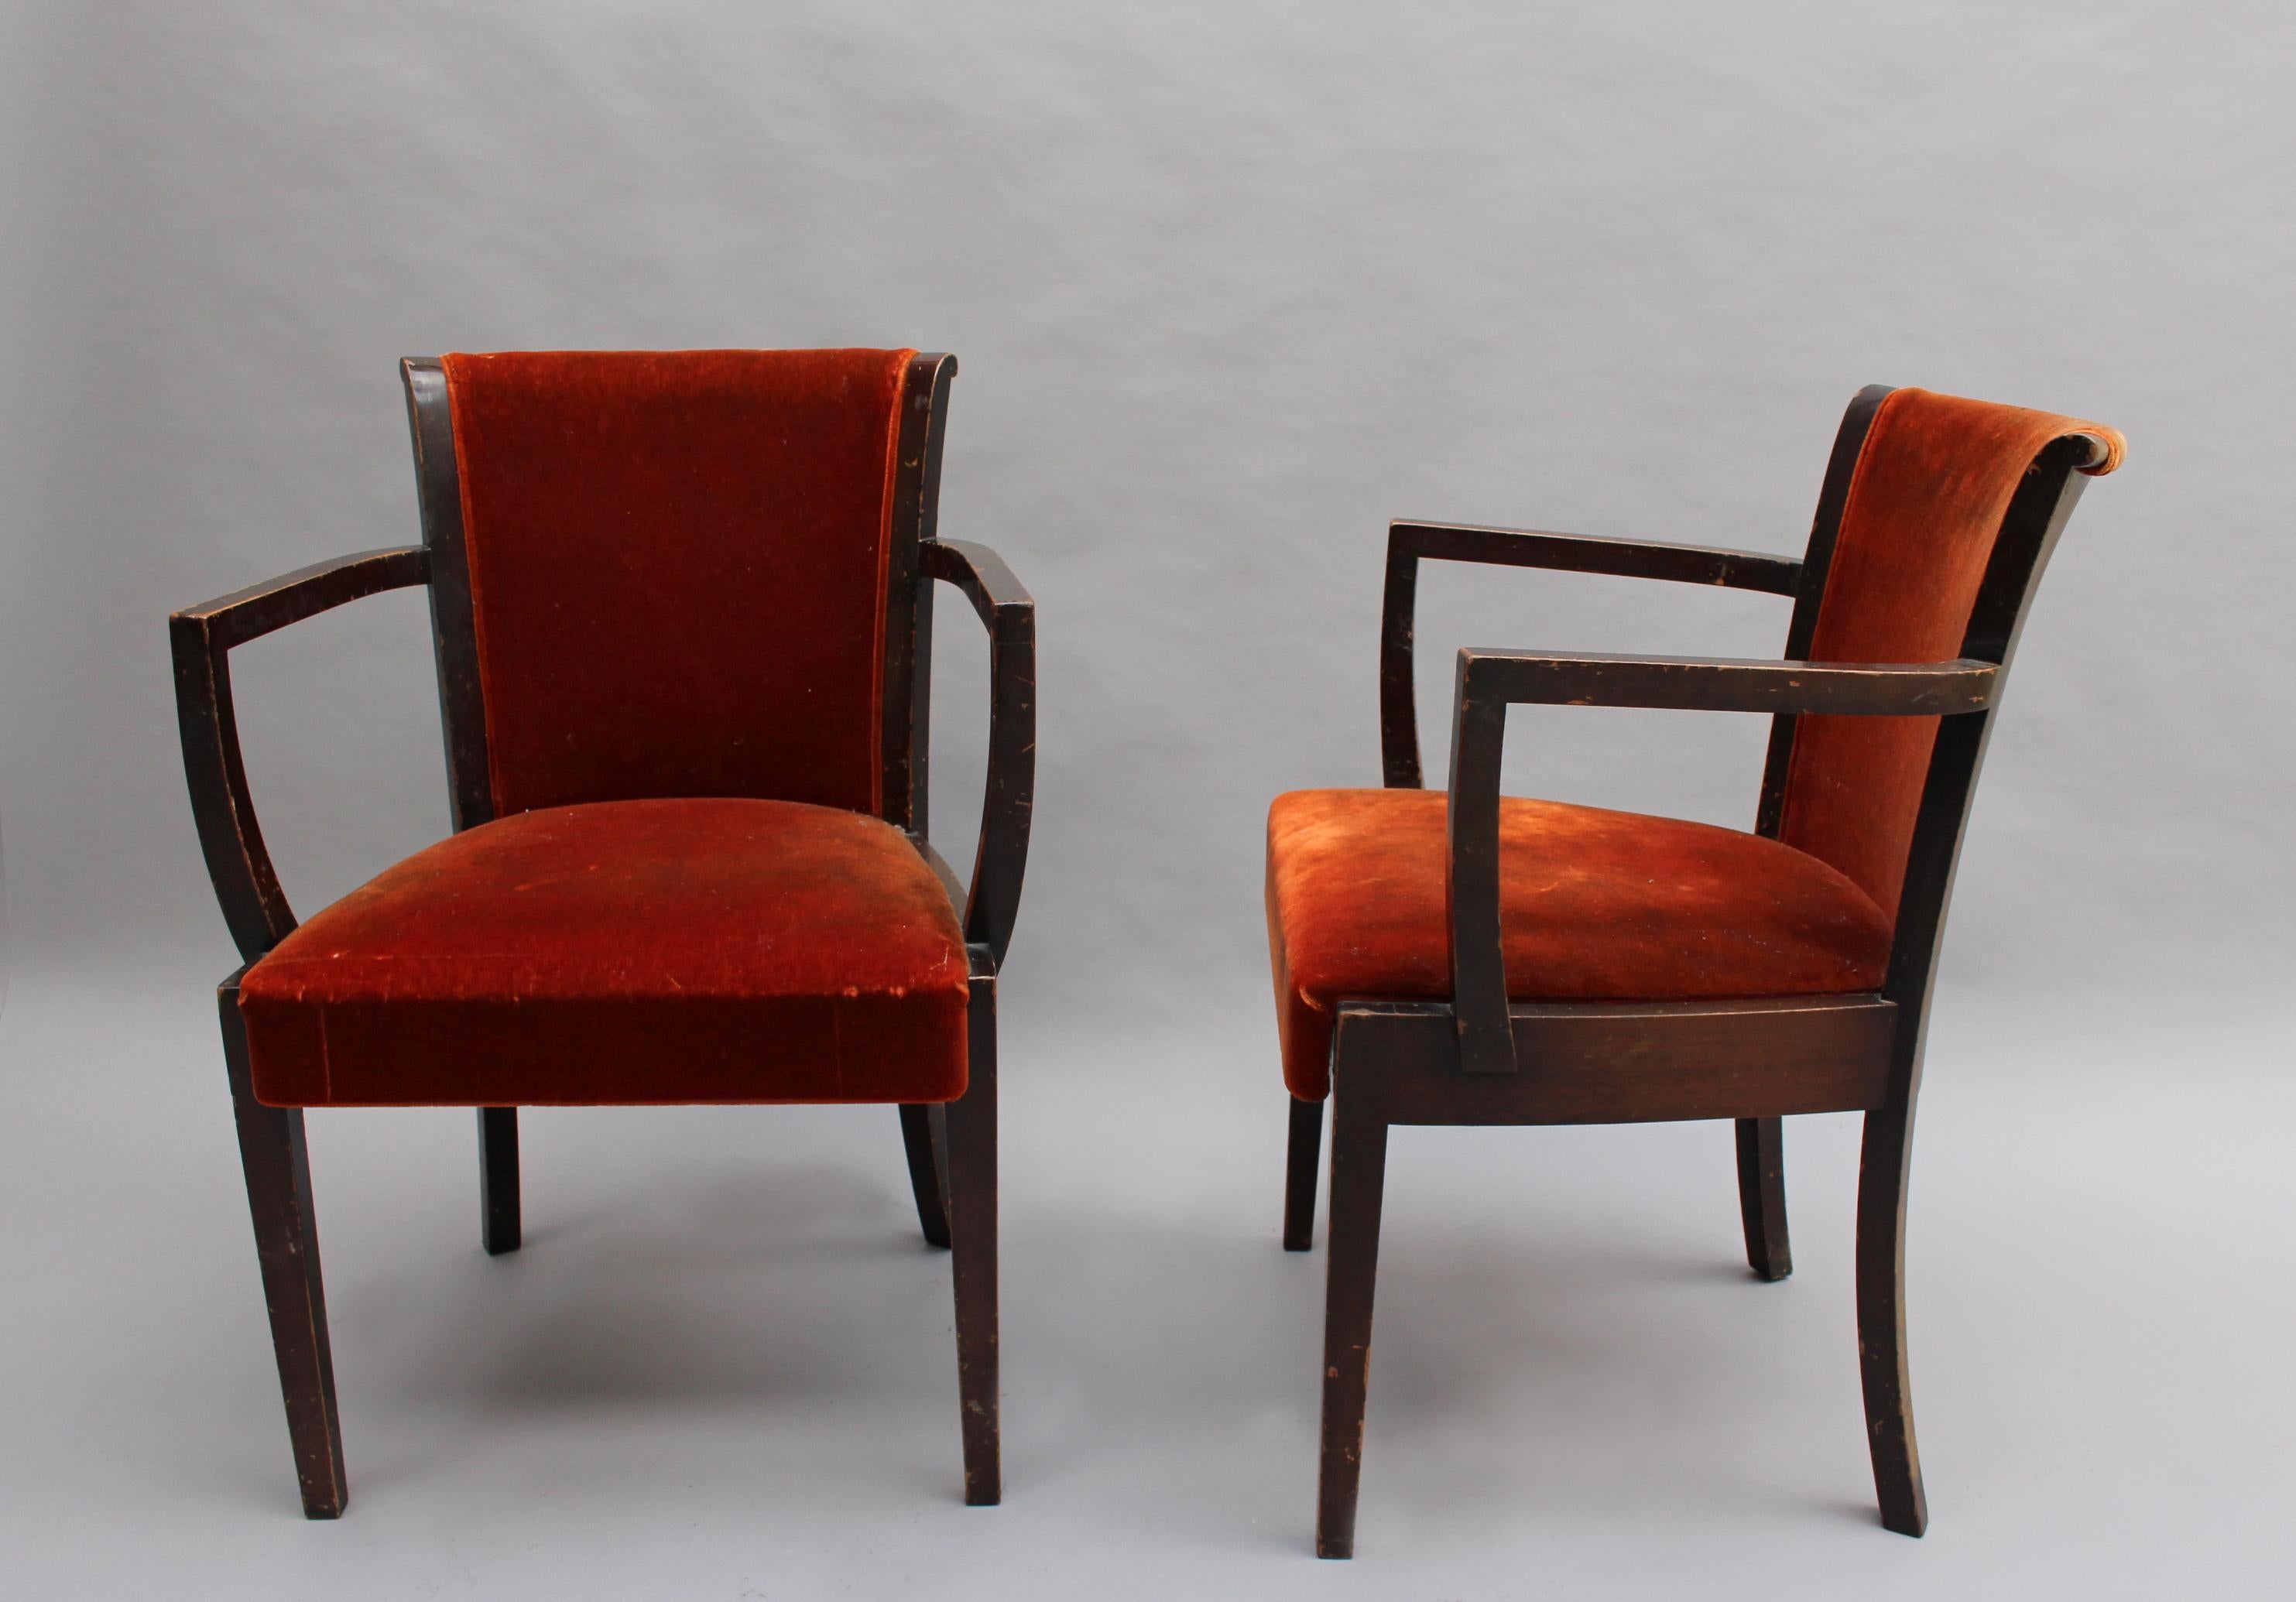 Set of 6 Fine Belgium Art Deco Chairs by De Coene (4 Side and 2 Arm) In Good Condition For Sale In Long Island City, NY